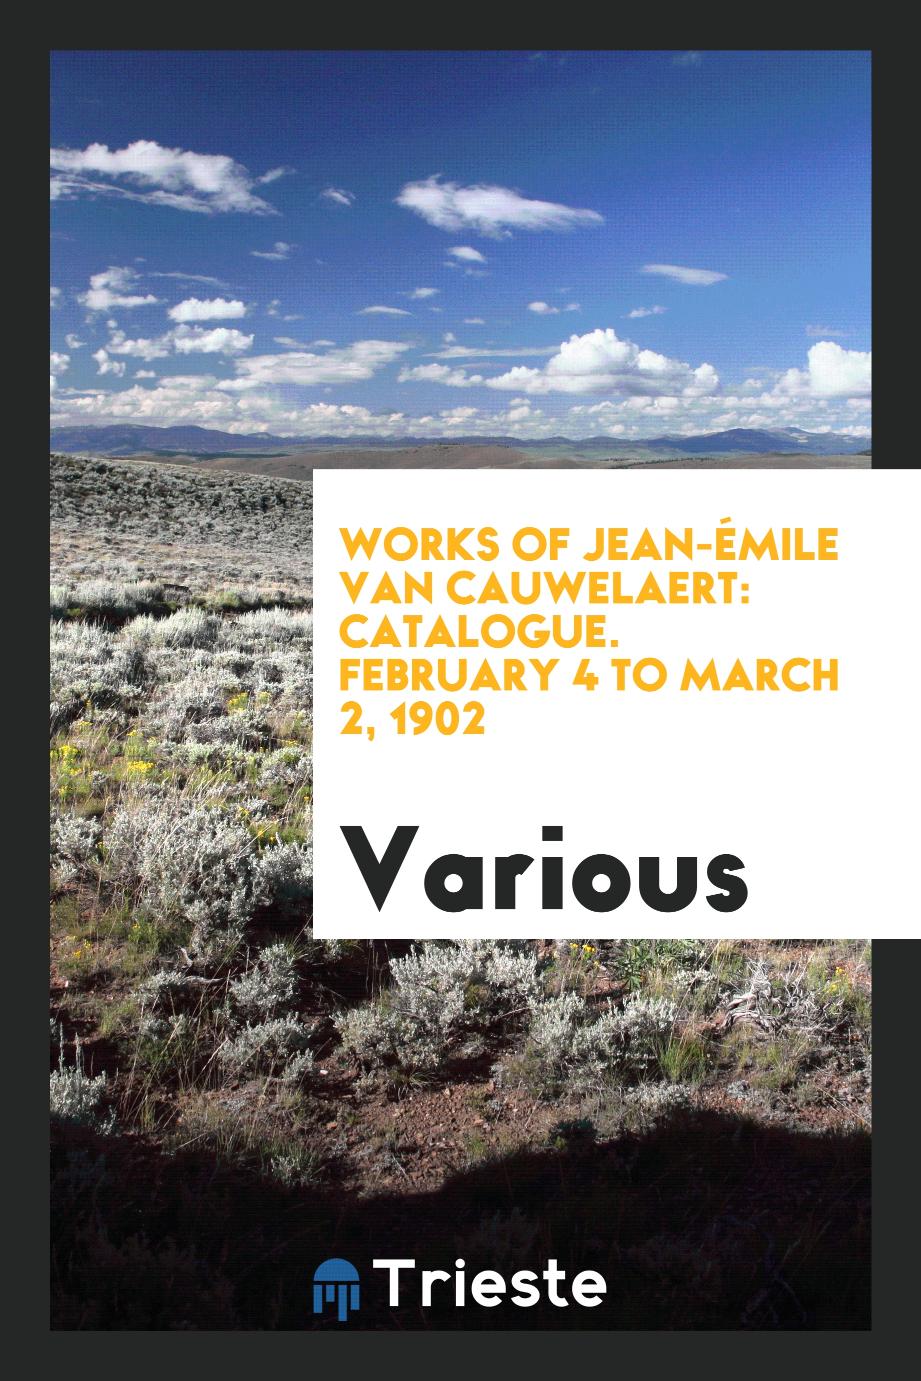 Works of Jean-Émile van Cauwelaert: Catalogue. February 4 to March 2, 1902